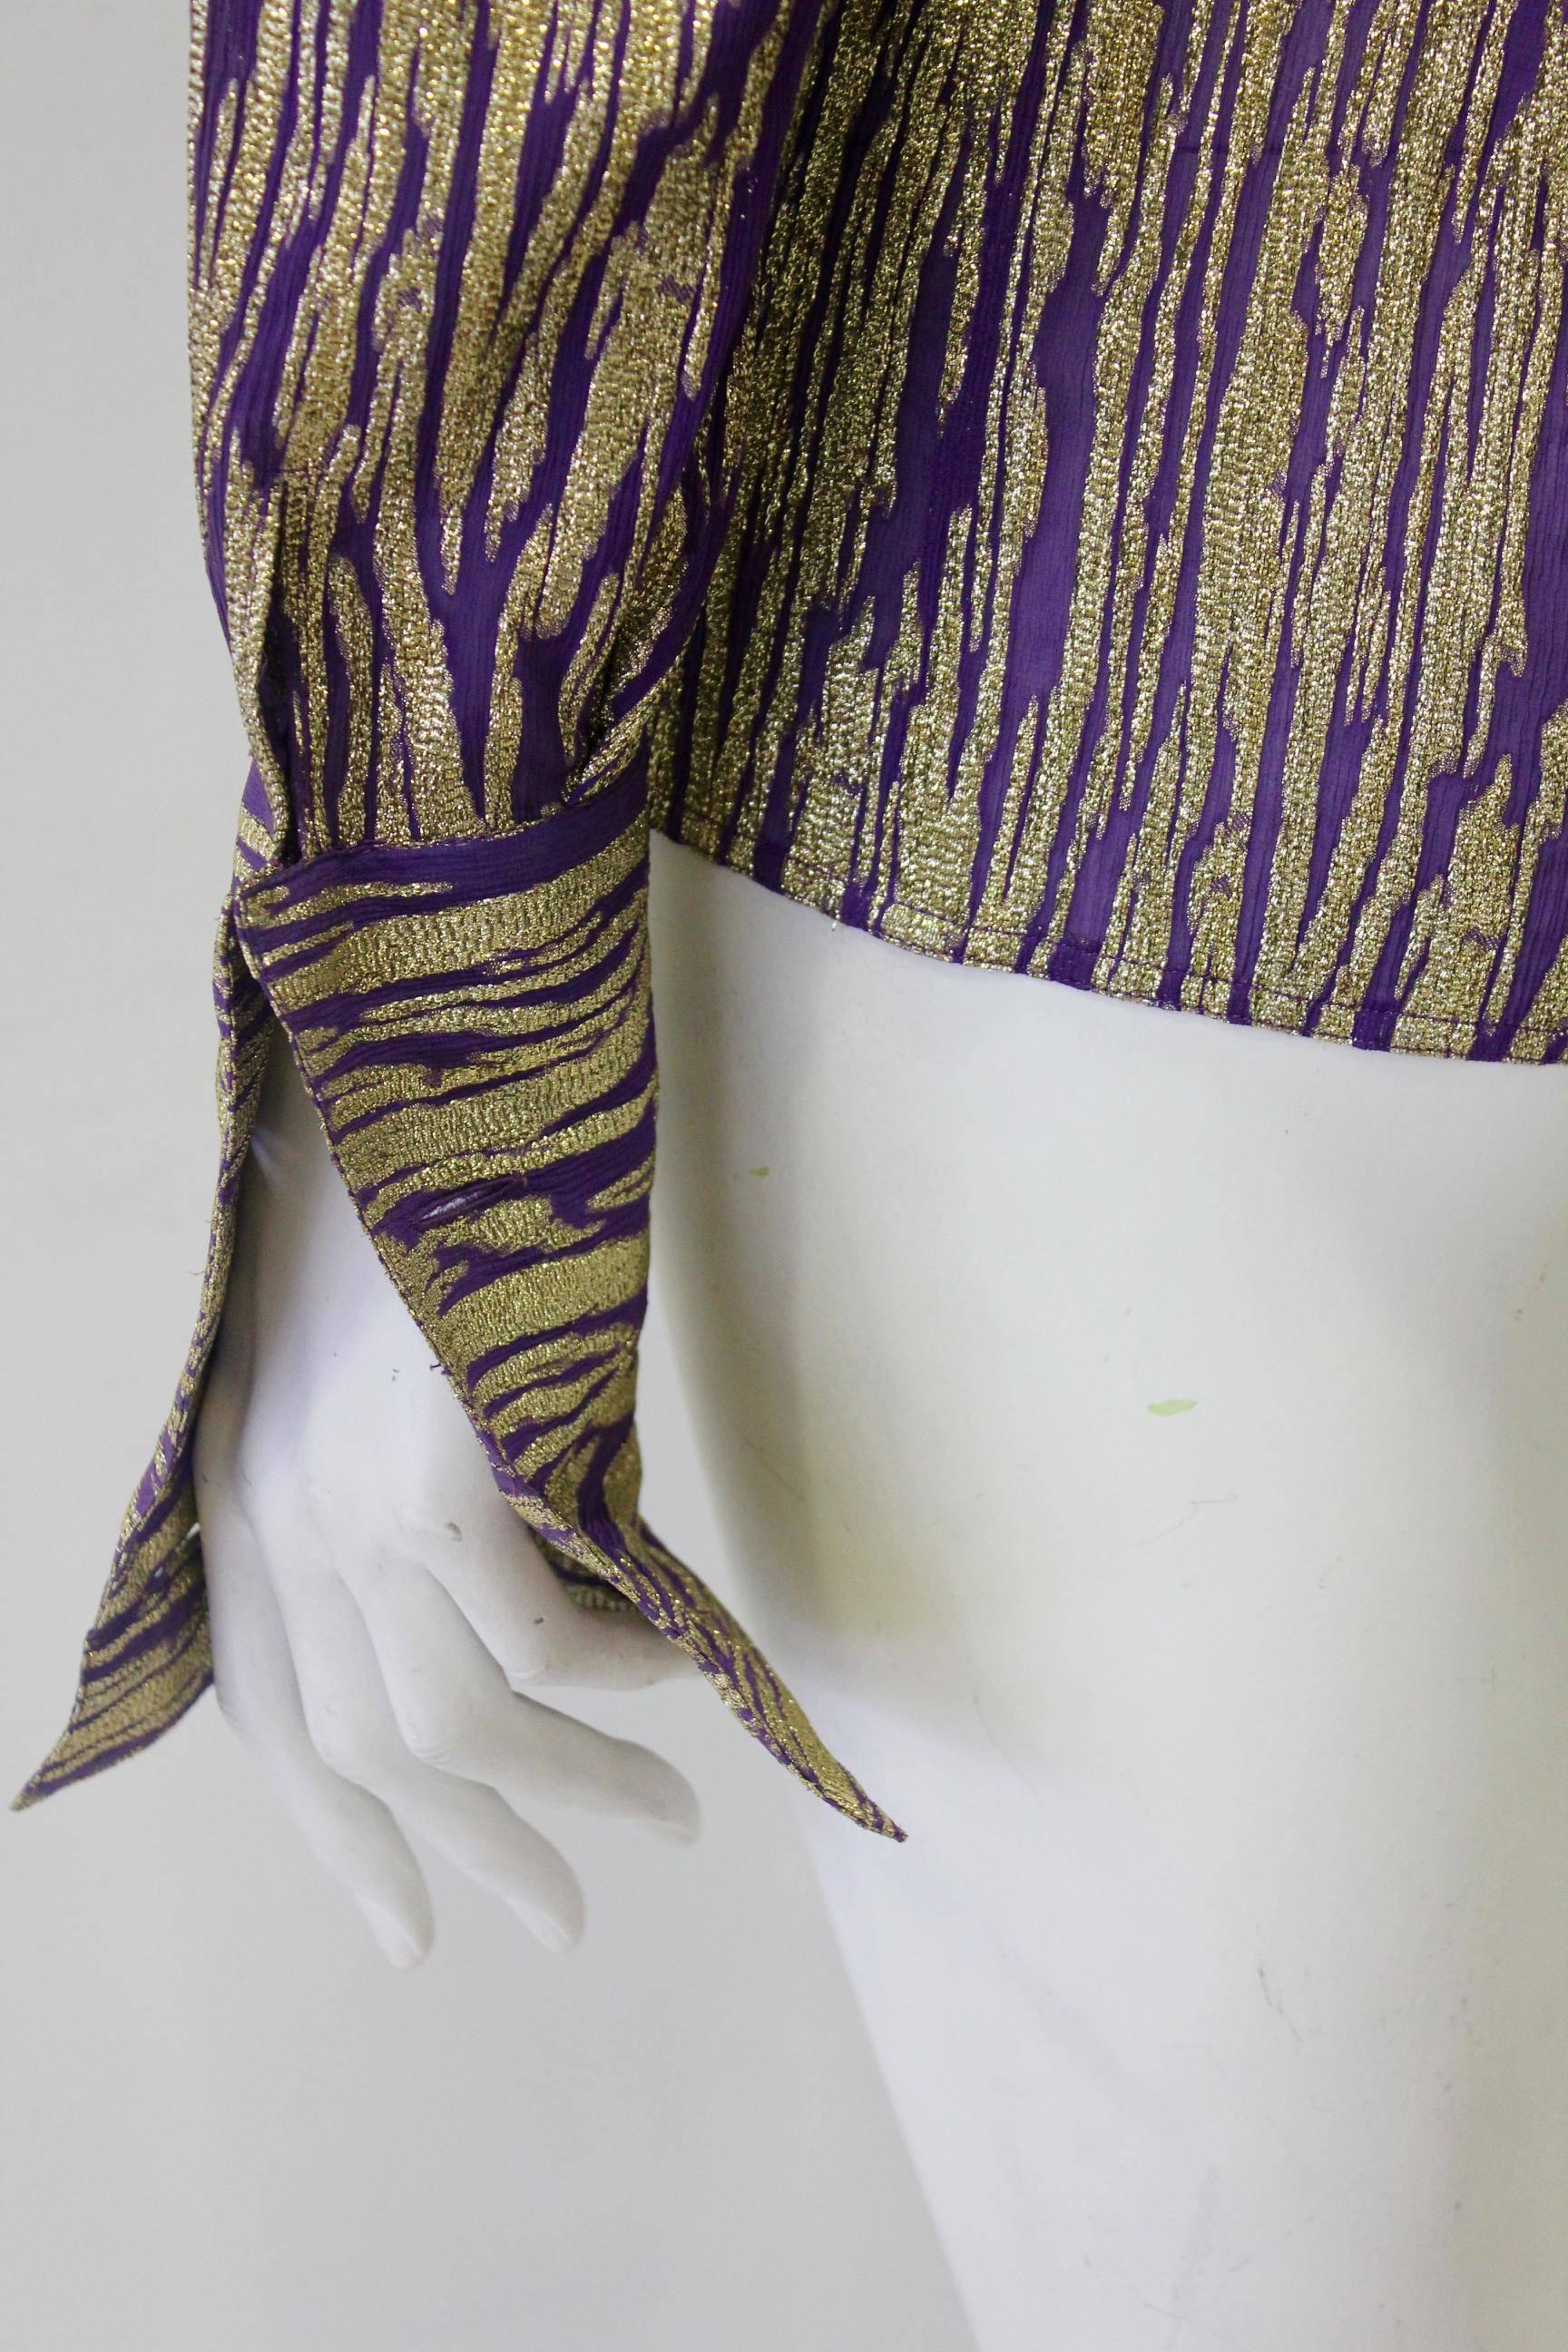 Gray Very Particular Gold-Purple Lurex Gianni Versace Couture Shirt For Sale